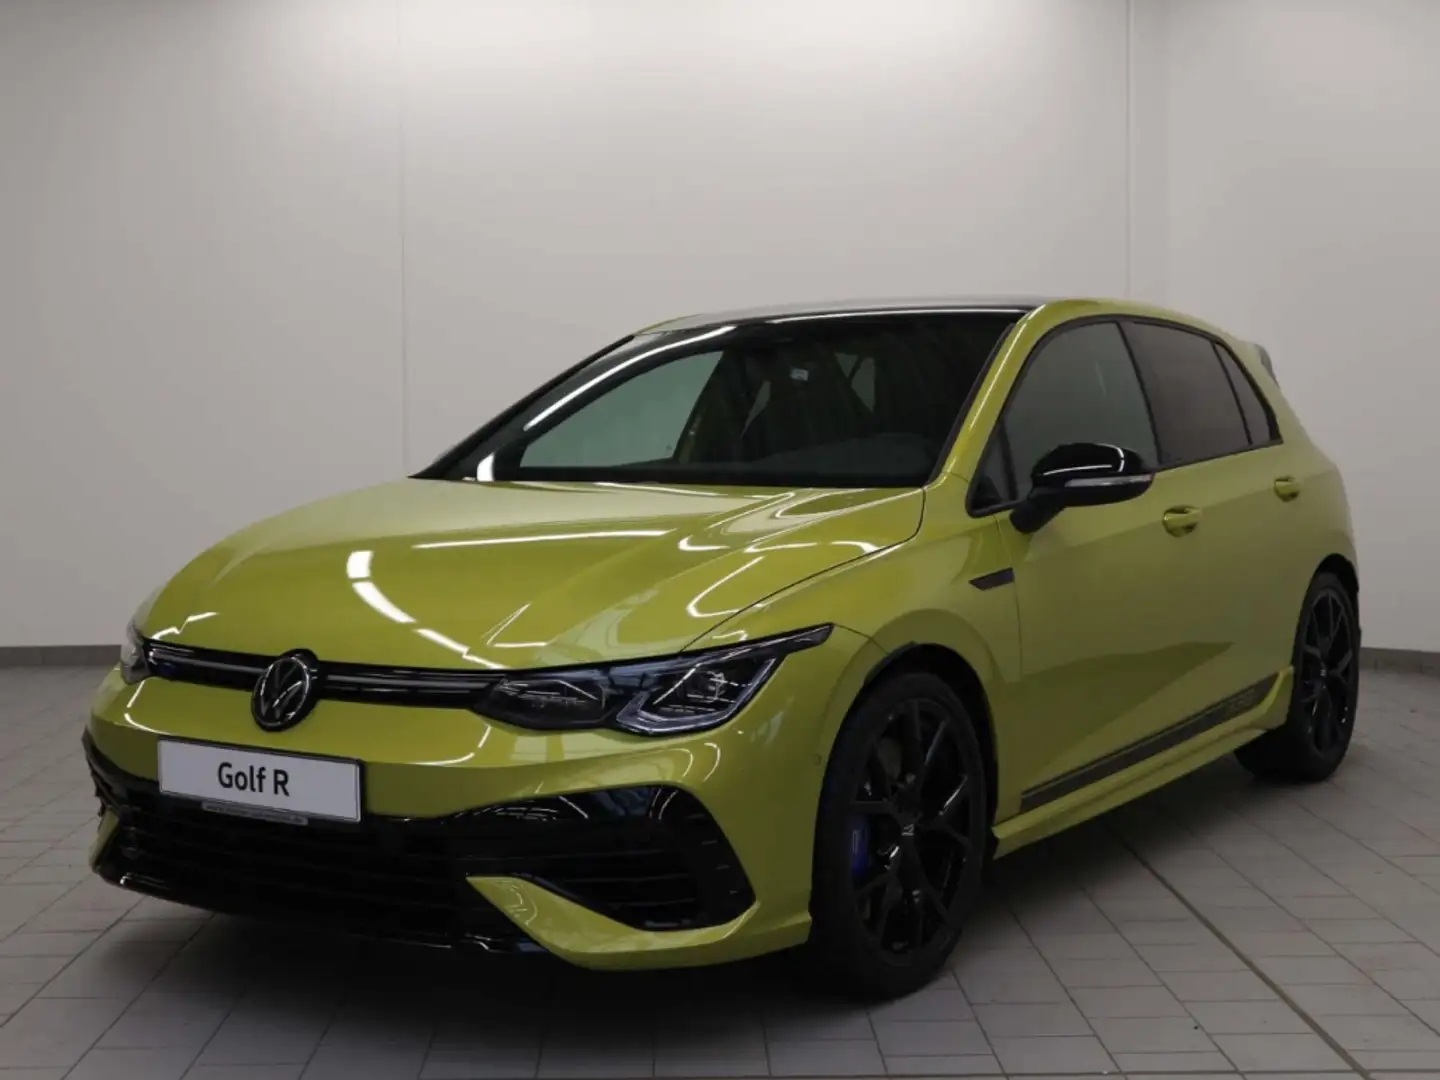 Volkswagen Golf R 2.0 TSI 4 Motion 333 - Limited Edition 301 Yellow - 2